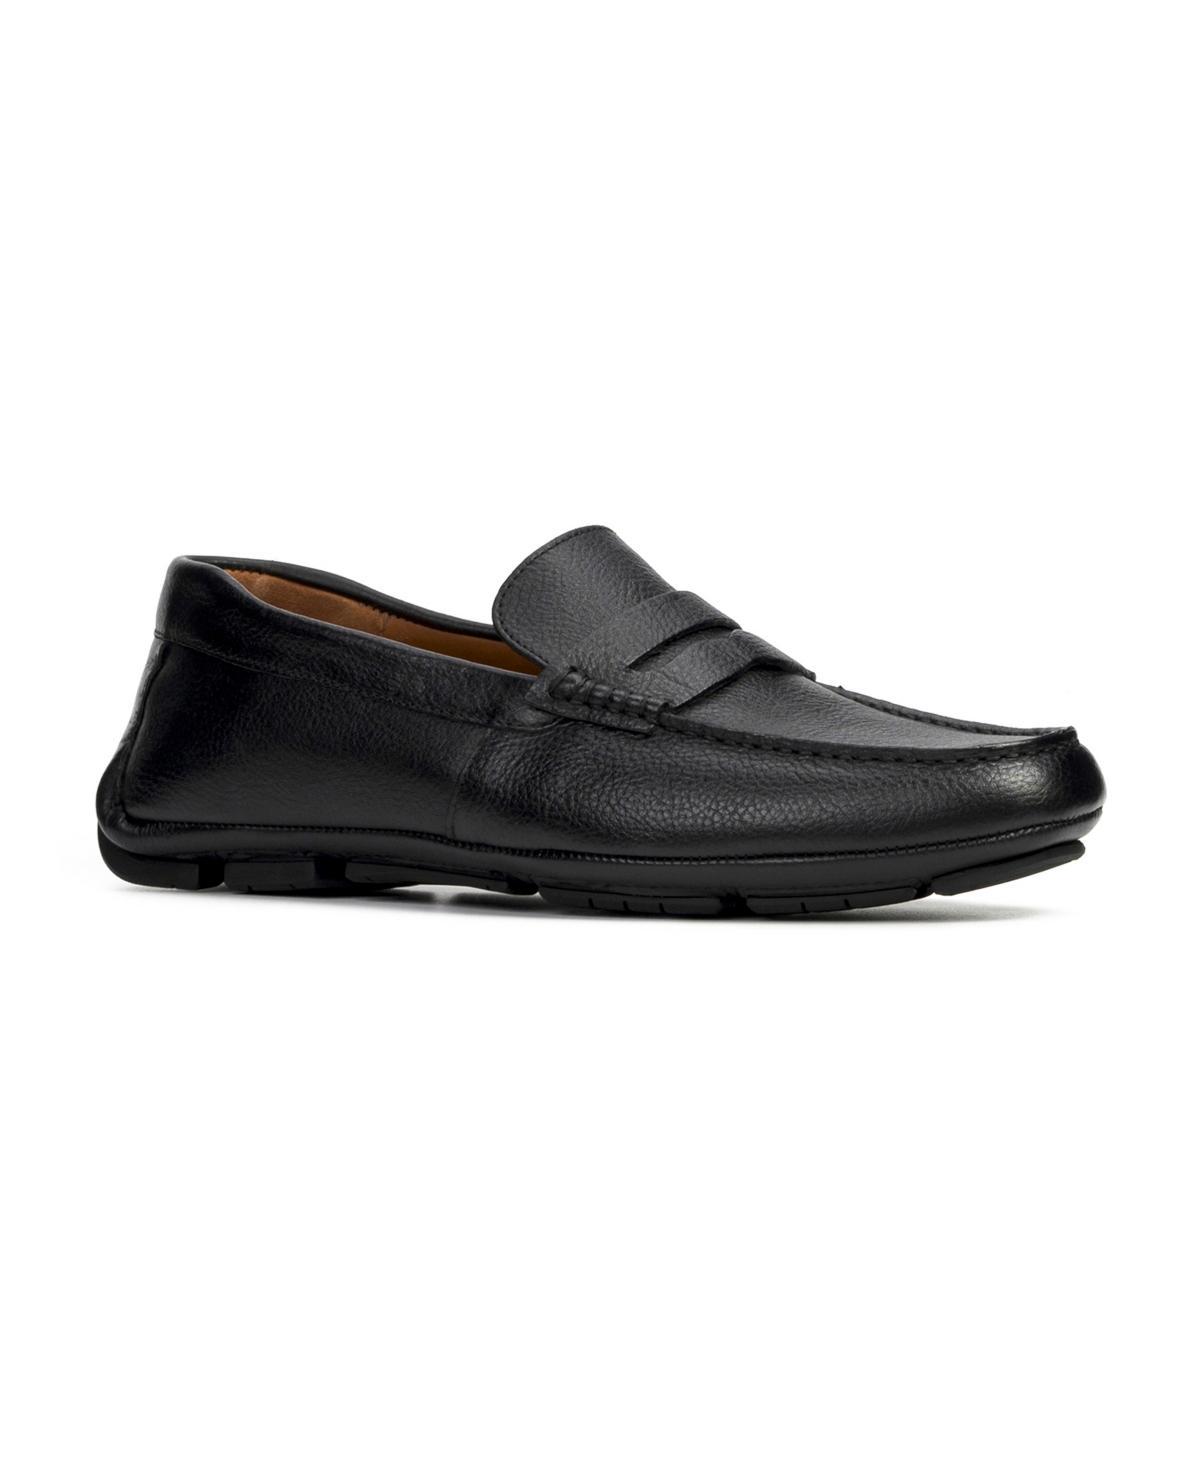 Anthony Veer Mens Cruise Driver Slip-On Leather Loafers Mens Shoes Product Image